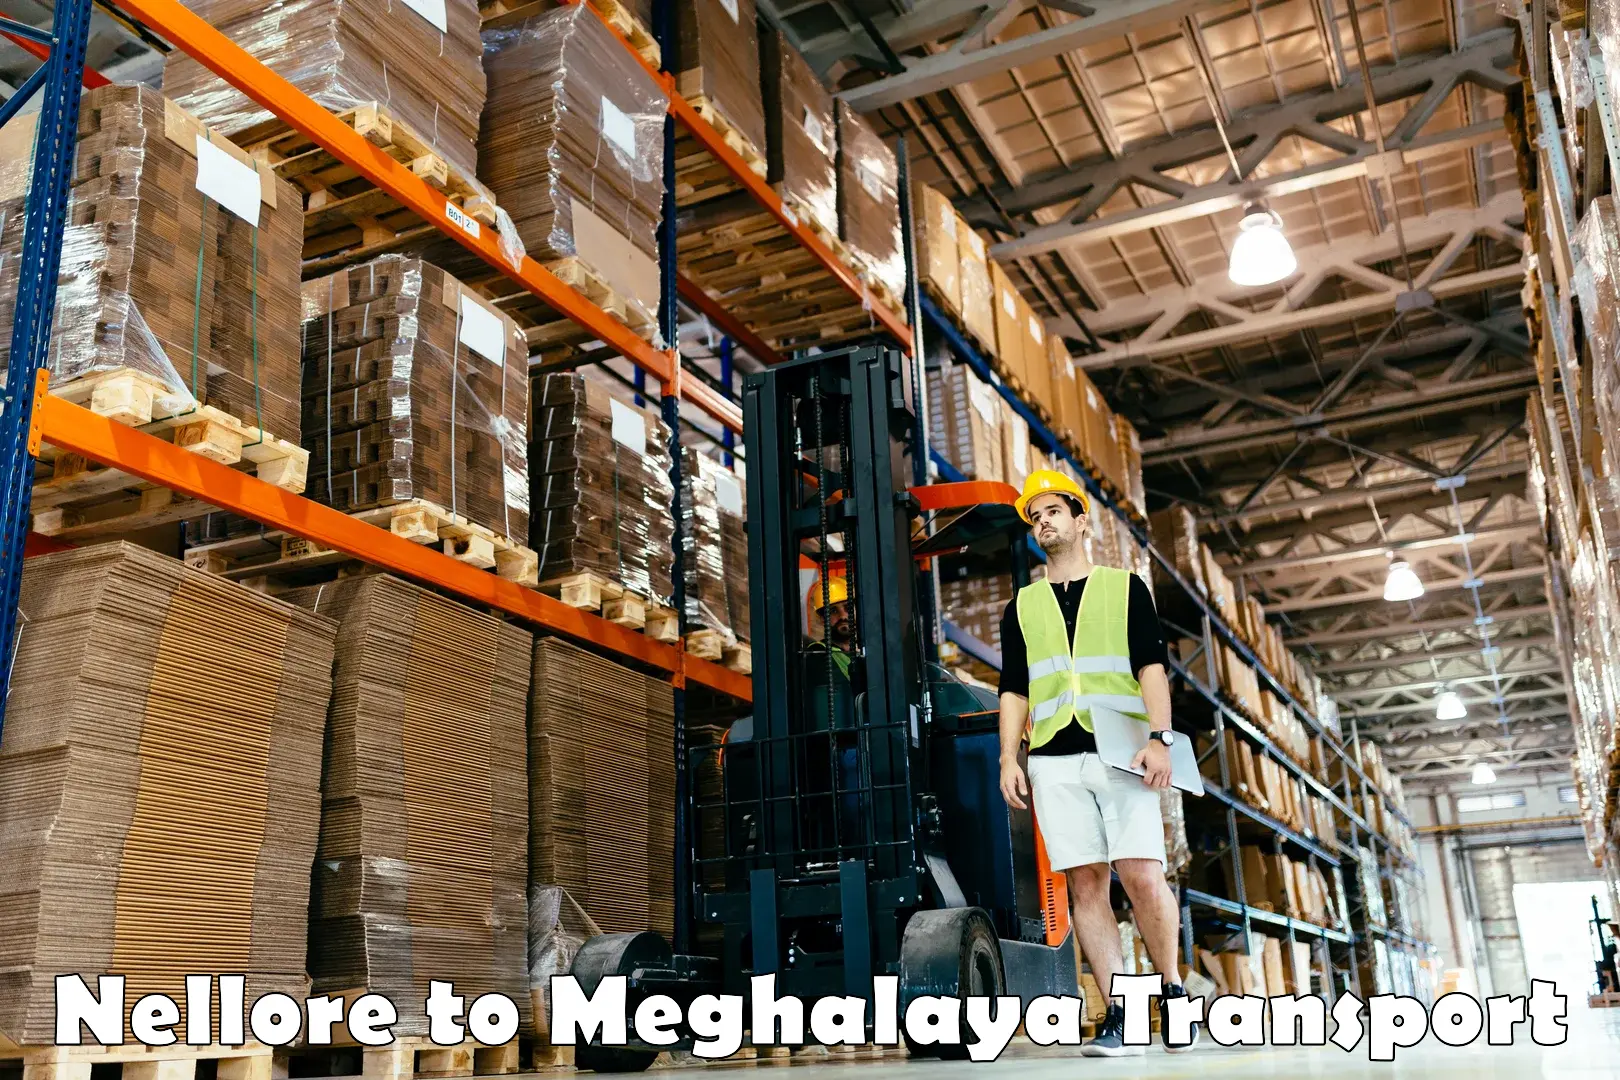 Delivery service Nellore to Meghalaya